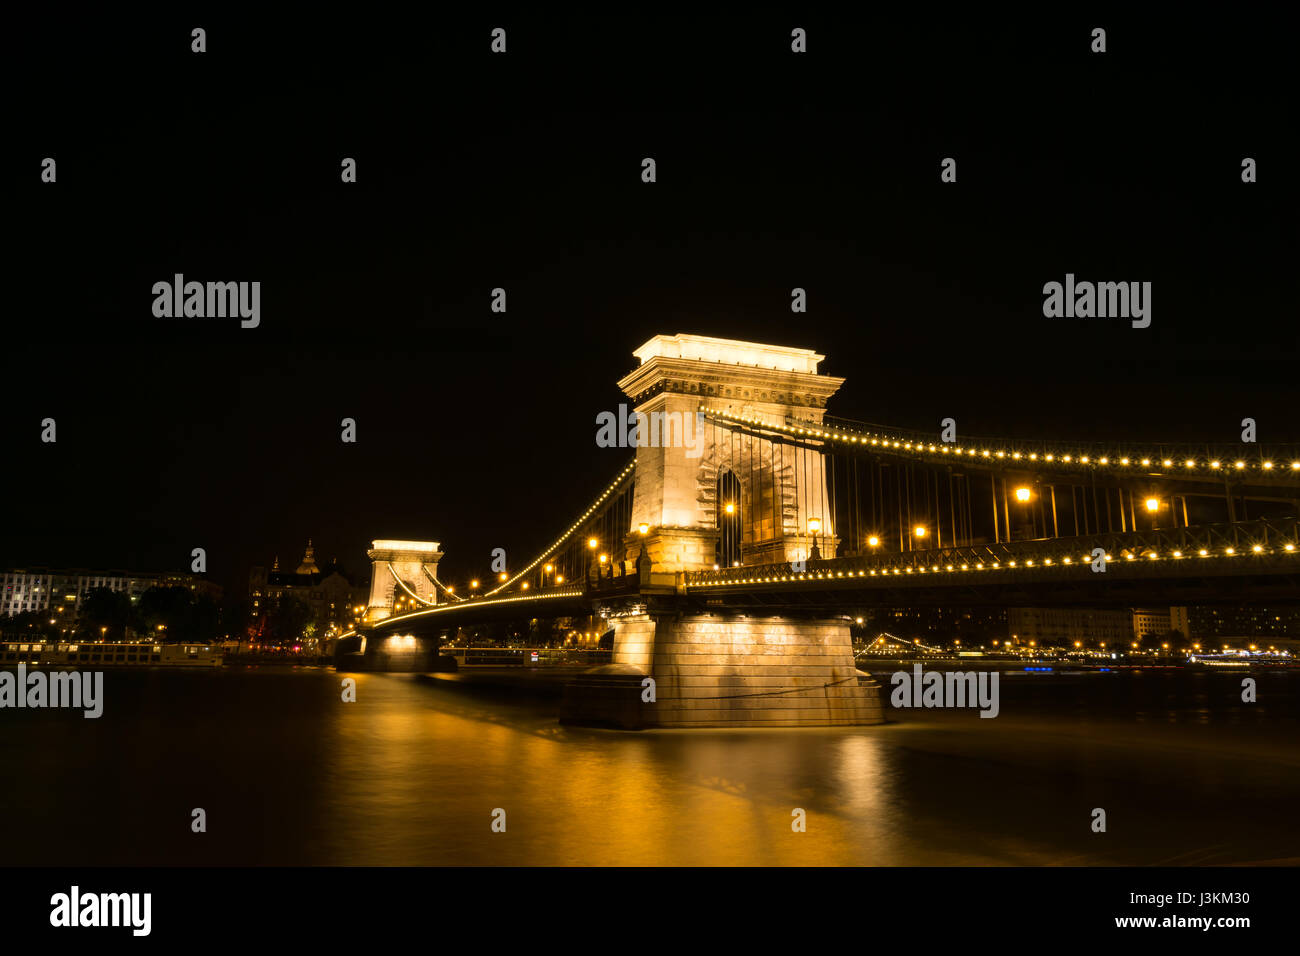 Golden lights illuminate Budapest's historic Chain Bridge which spans the River Danube, view from Buda to Pest. Stock Photo